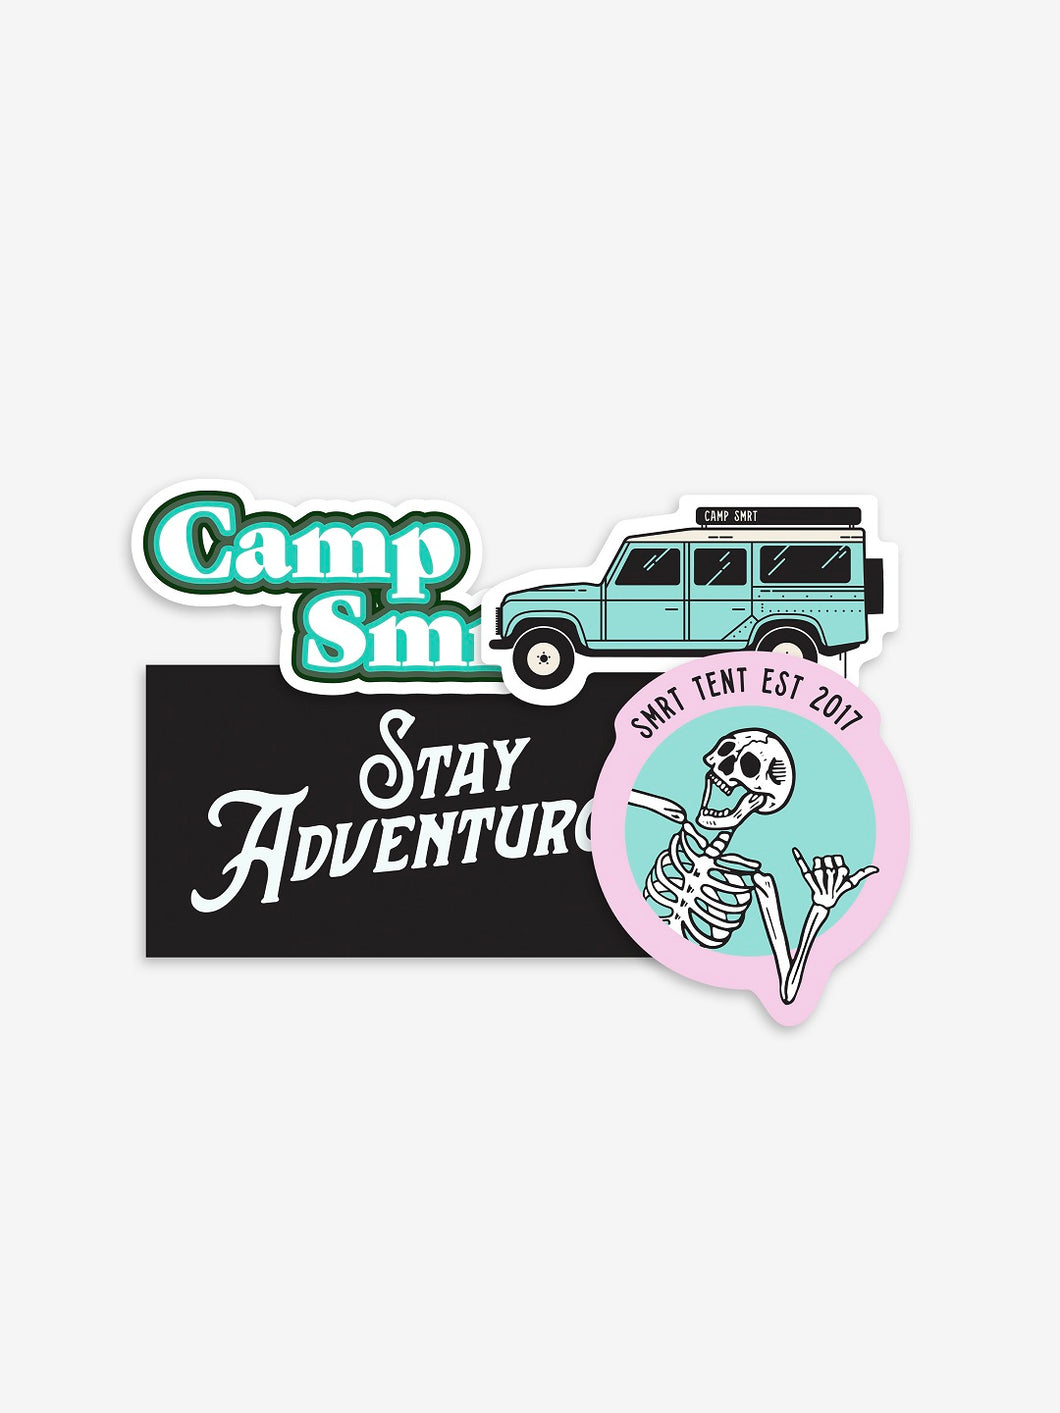 Pictured are the 4 stickers in the Cool Blue theme of our SMRT Tent Sticker Pack. Included are (1) Camp SMRT Retro Green and white sticker, (1) Camp SMRT Land Rover Defender 110 sticker in teal, (1) Classic rectangular Black and White Stay Adventurous sticker, and (1) Classy Pink & Teal Laughing Skeleton SMRT Tent EST 2017 sticker. Perfect for your roof top tent or water bottle! Available for sale by SMRT Tent in Edmonton, Canada.